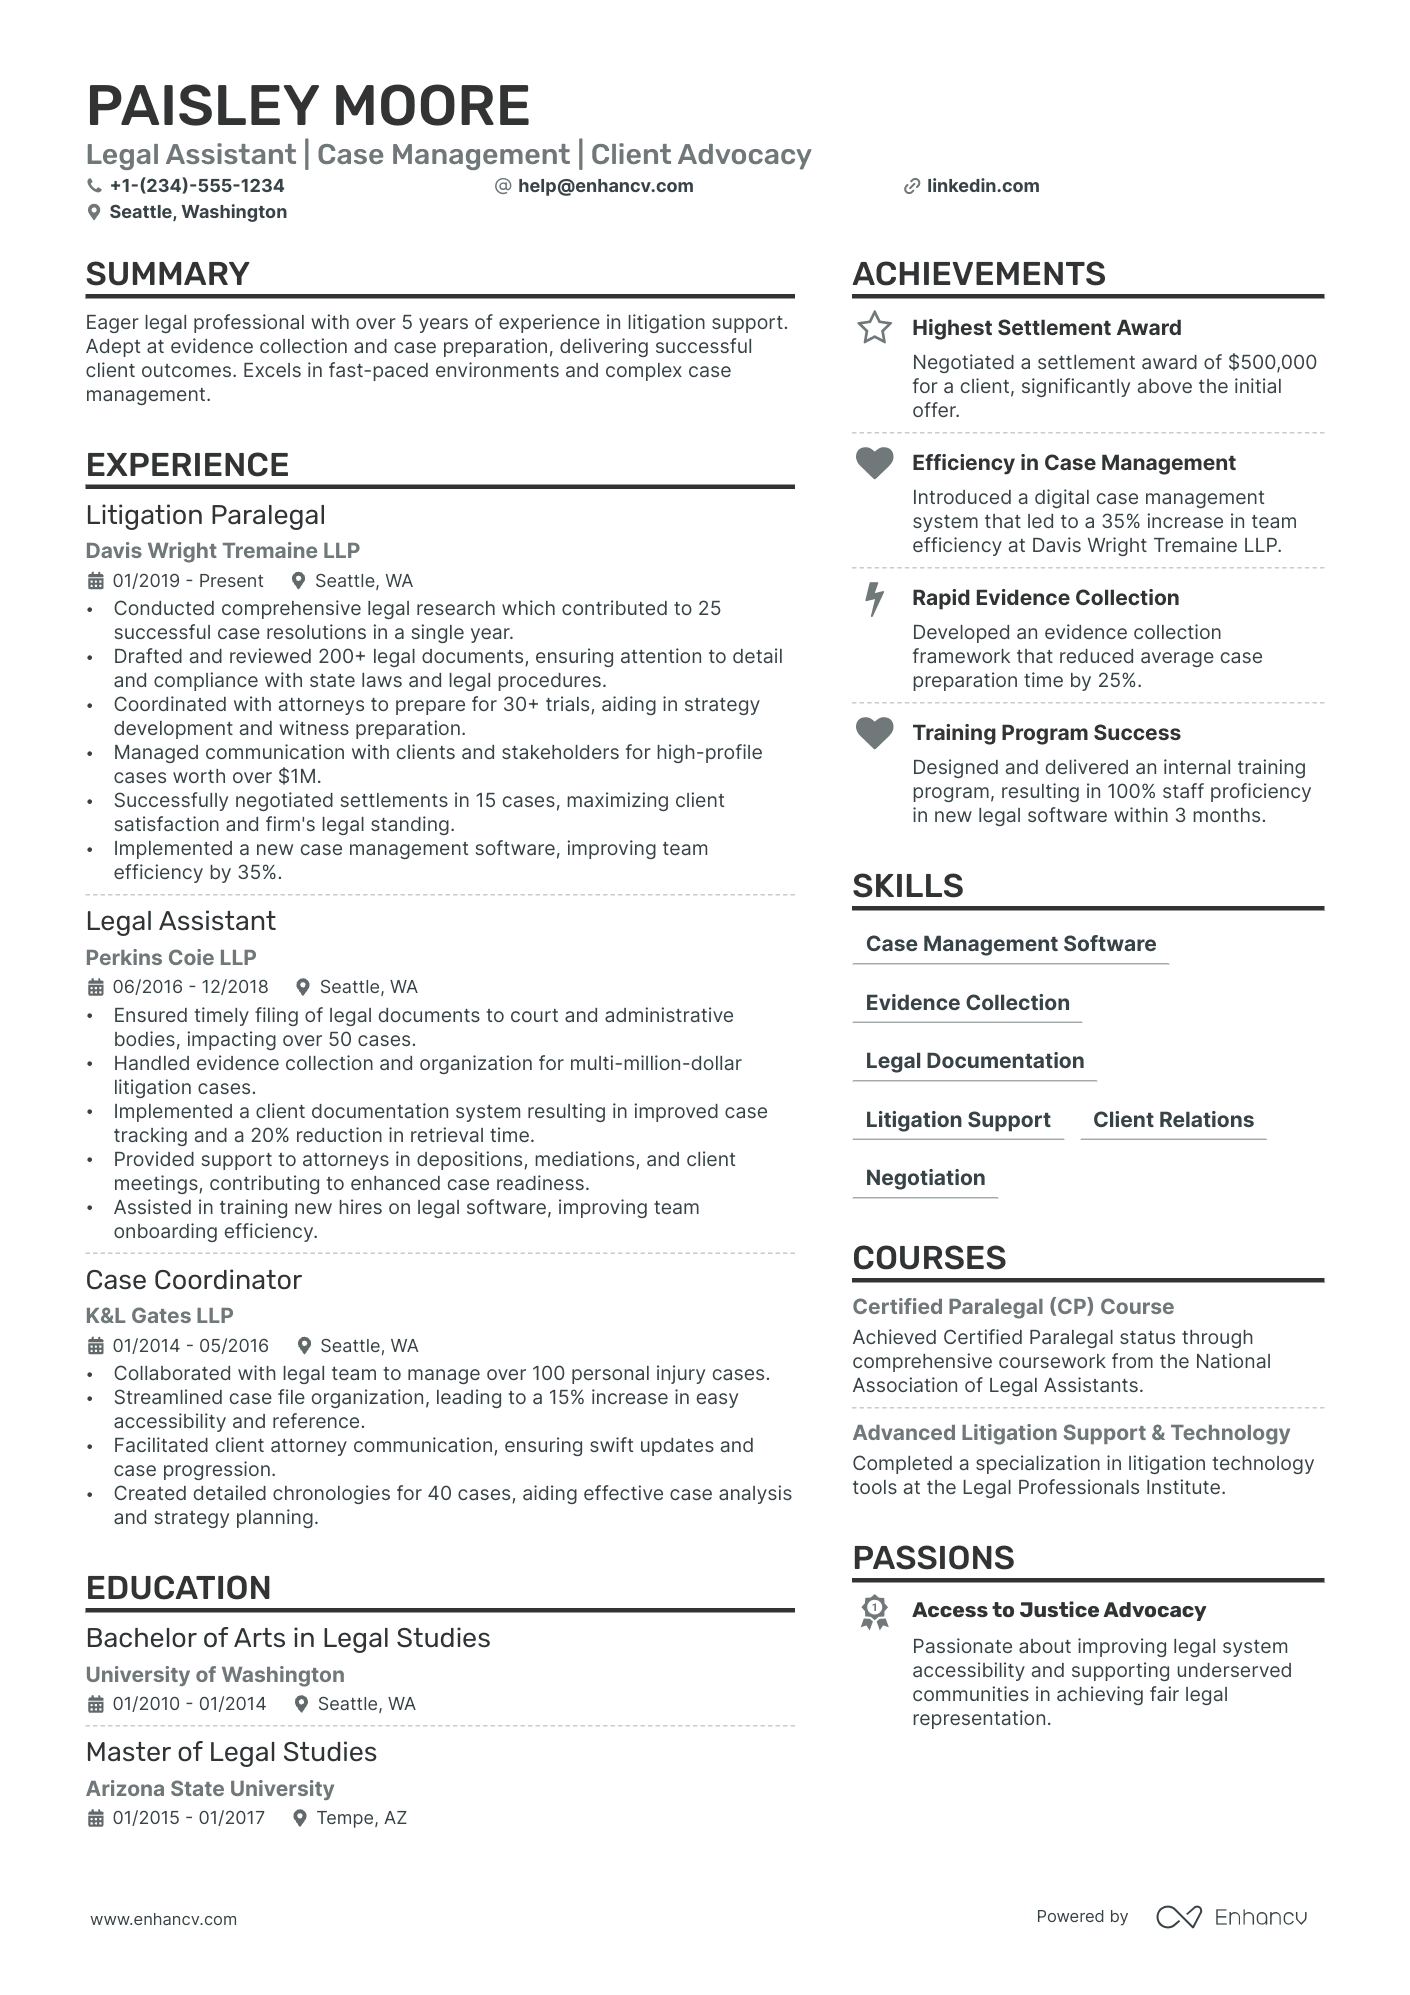 professional summary for resume healthcare examples